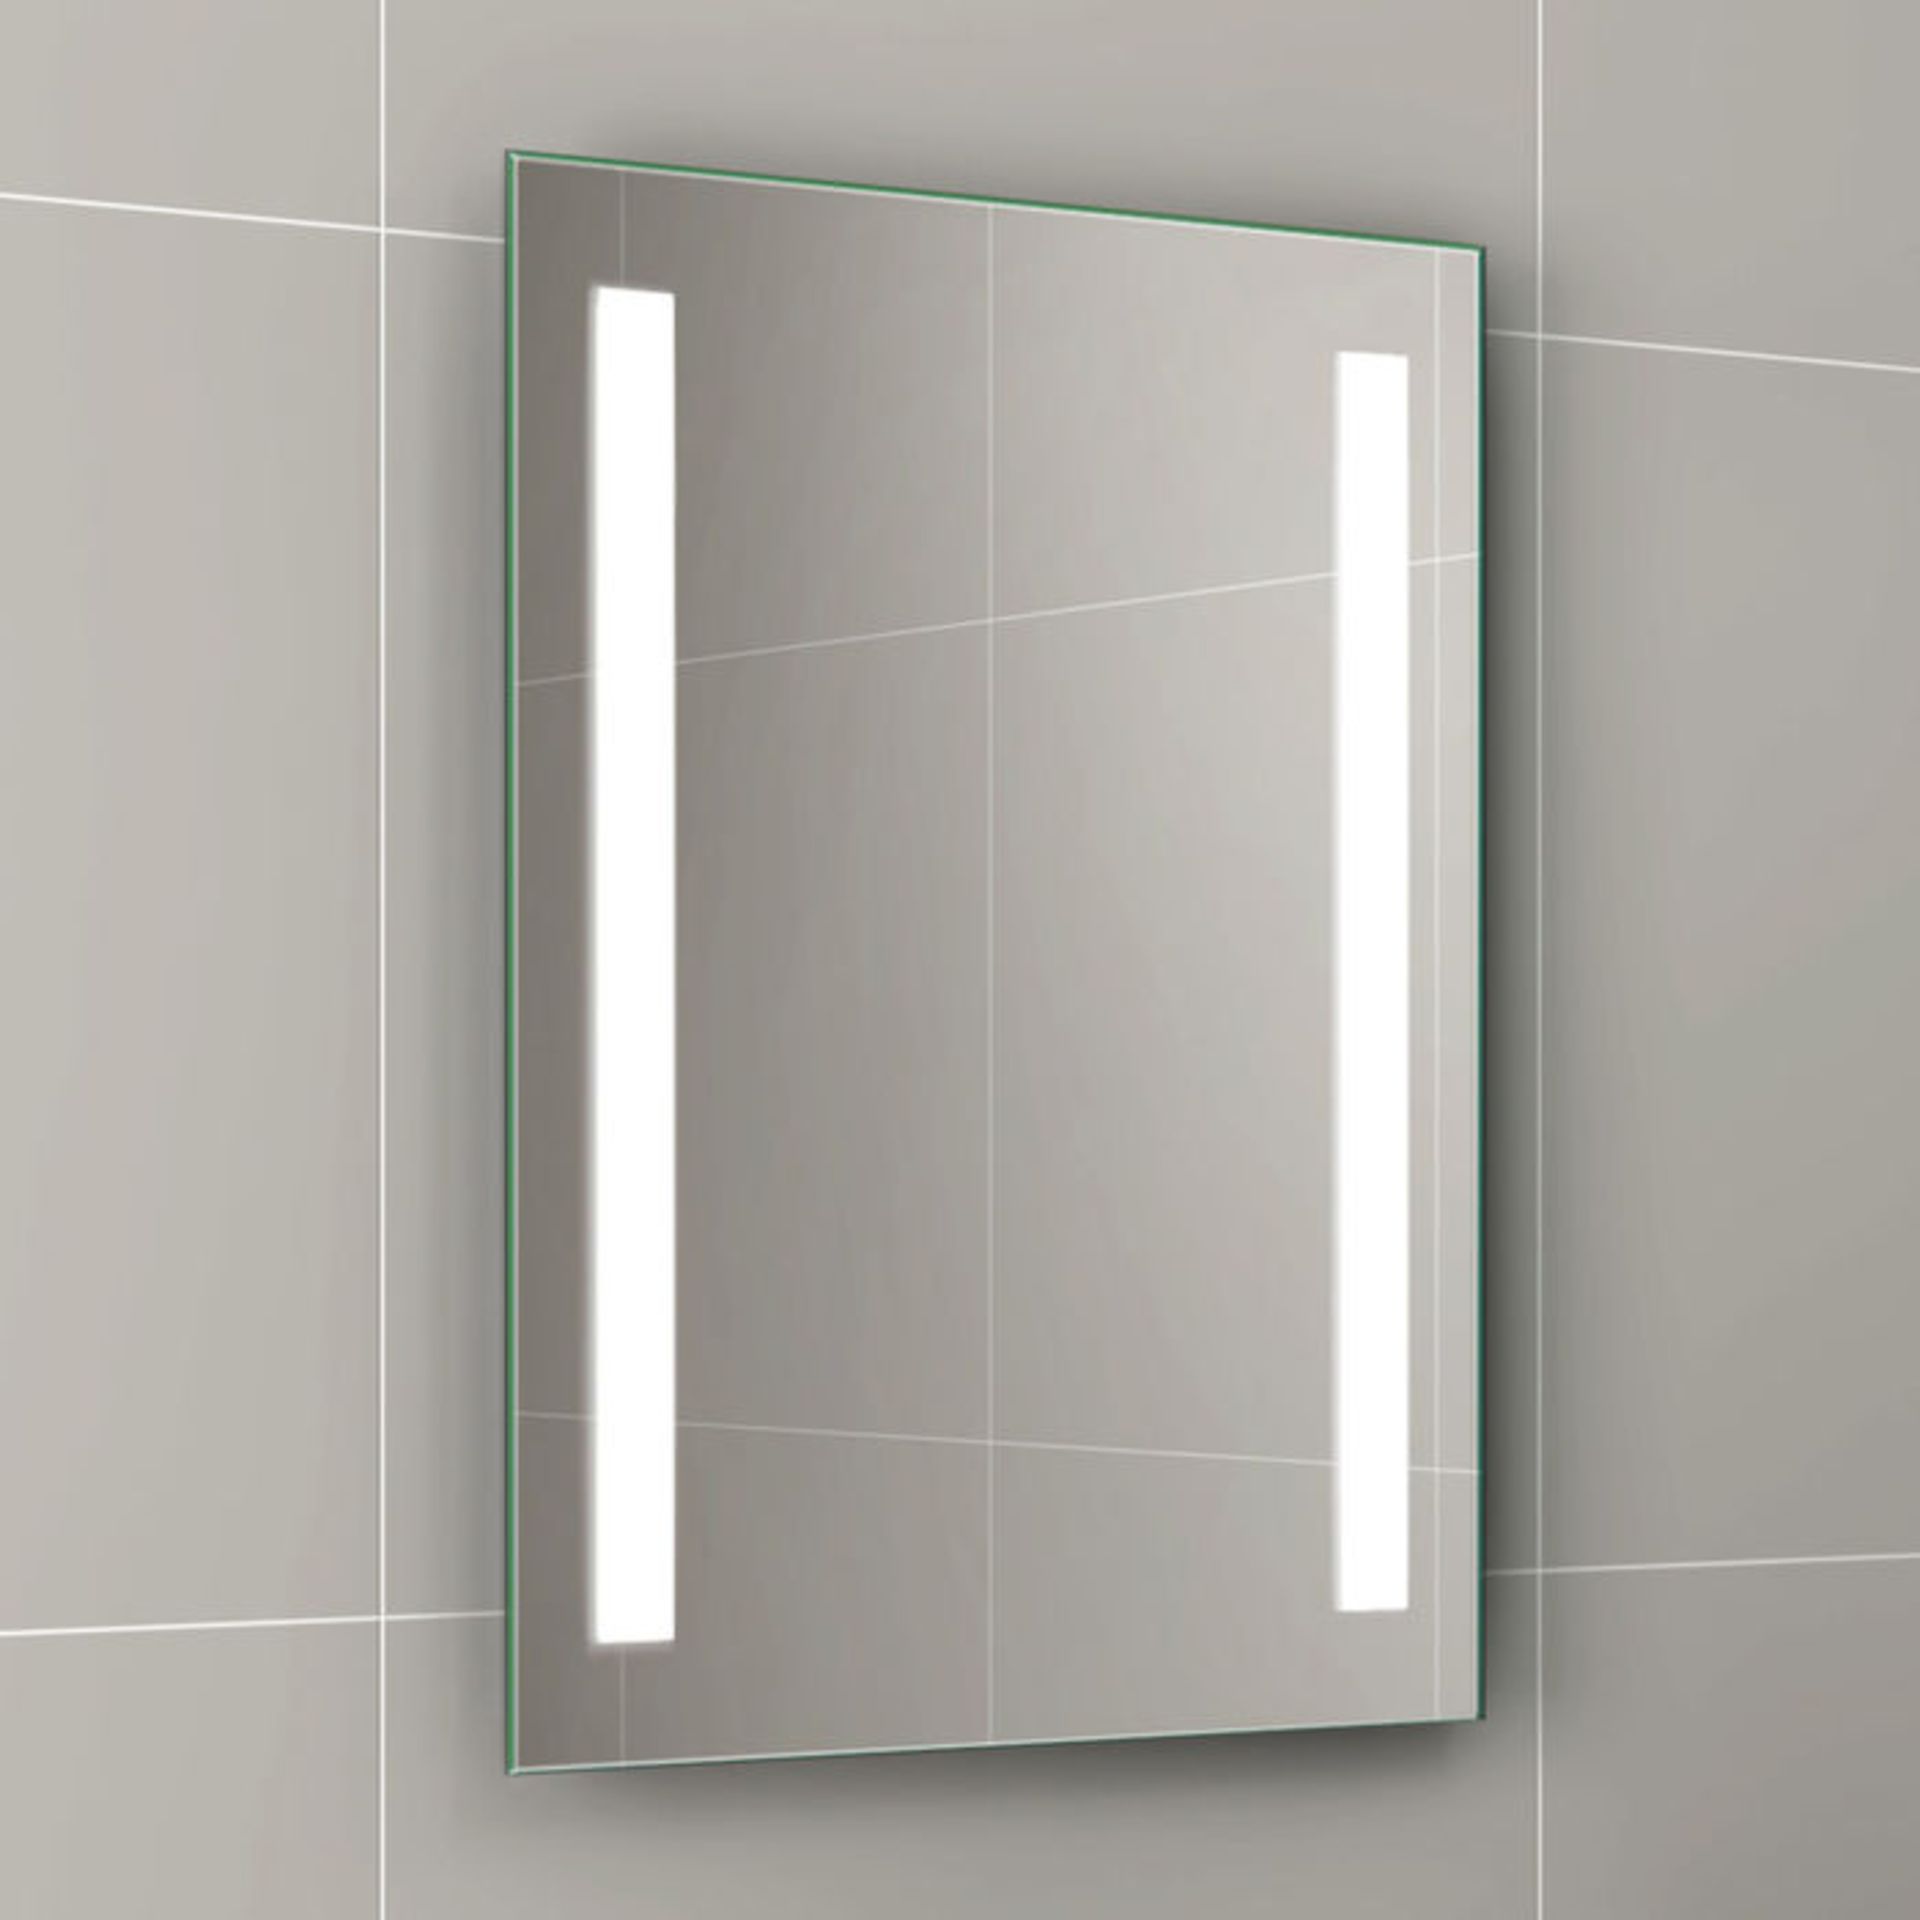 (KR213) 500x700mm Omega Illuminated LED Mirror - Battery Operated. Energy saving controlled On / Off - Image 2 of 3